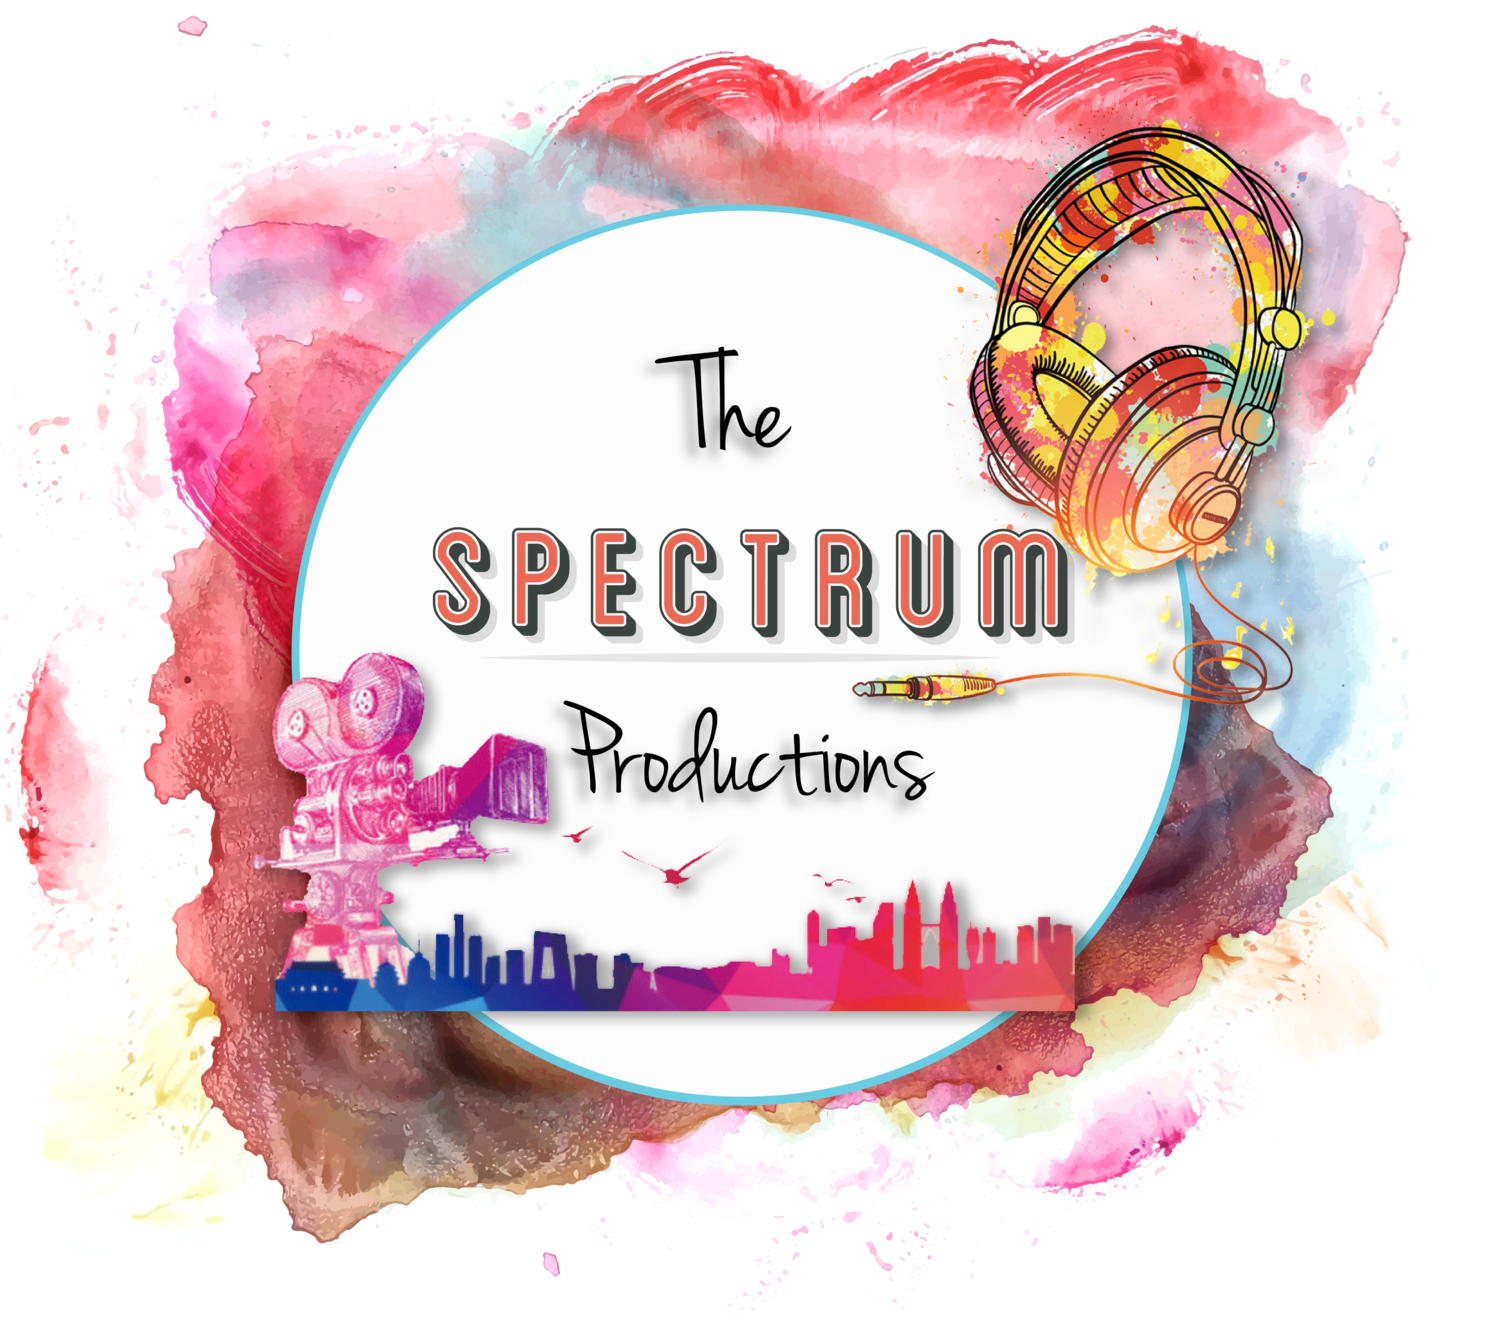 The Spectrum Productions